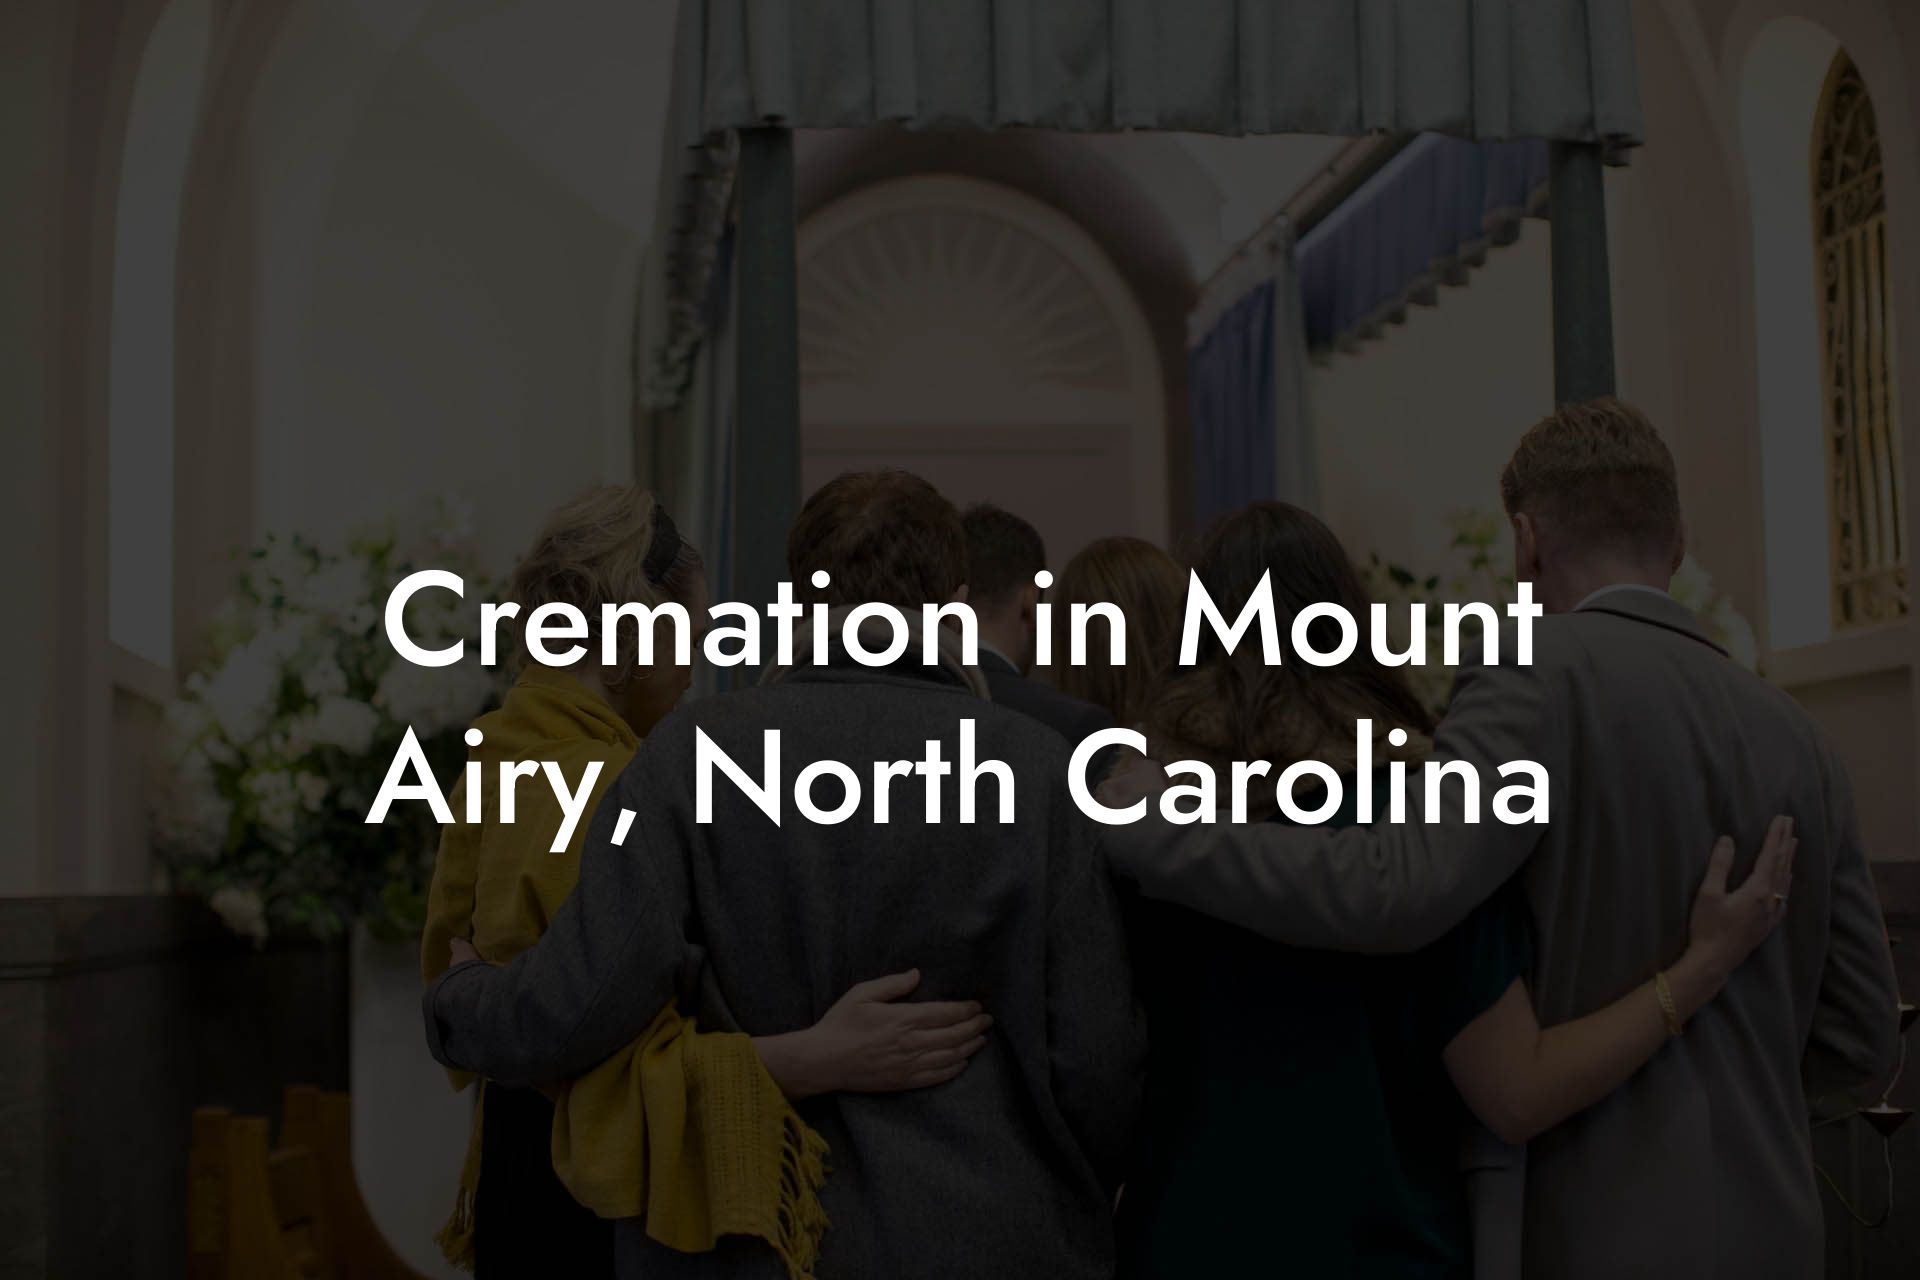 Cremation in Mount Airy, North Carolina